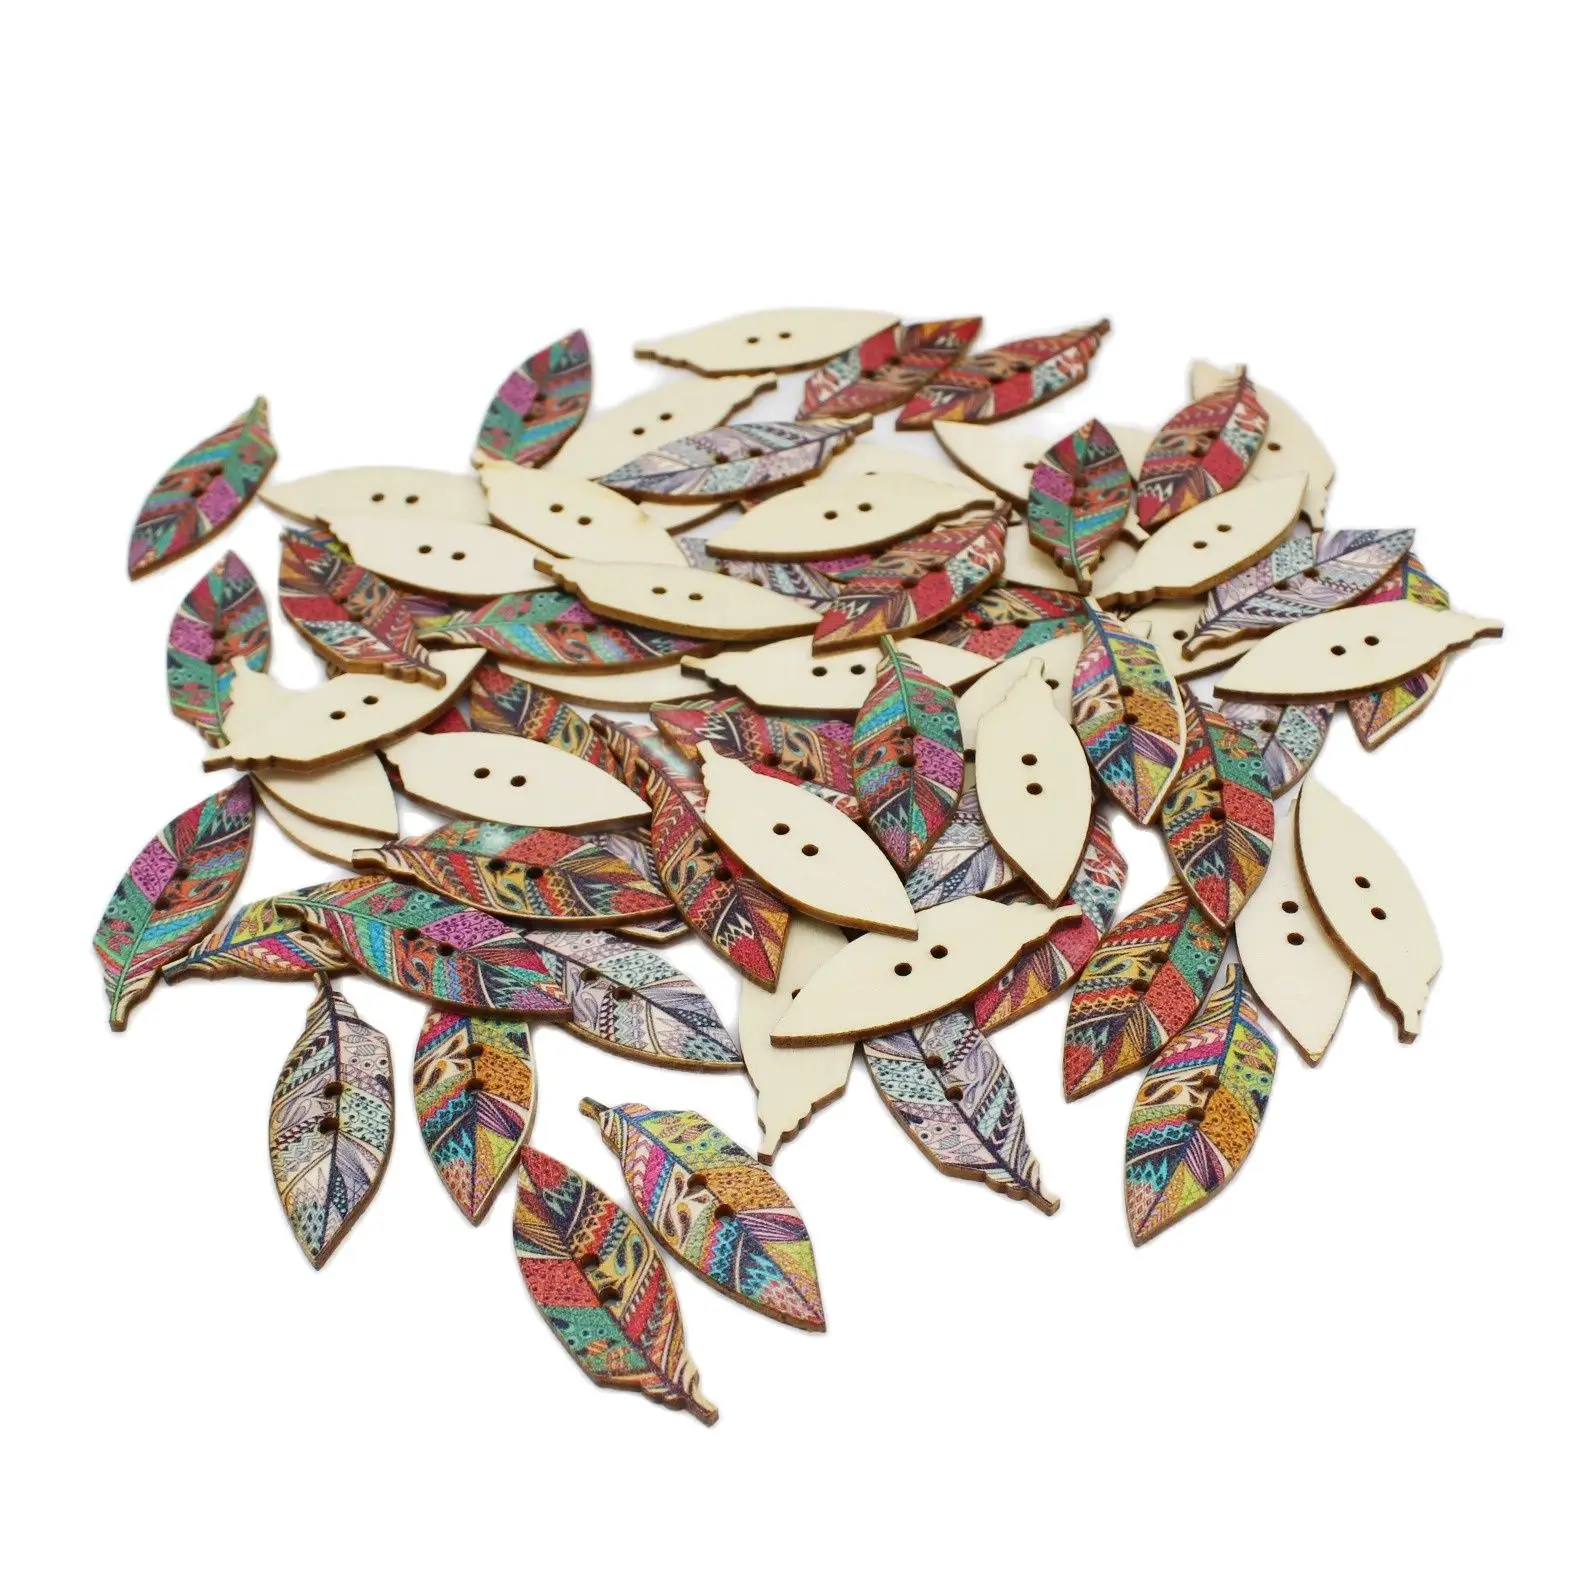 

50PCs/lot Fashion Leaves Painting buttons 2 Holes DIY Random Wooden Buttons For craft items Scrapbooking Accessories 15x41mm